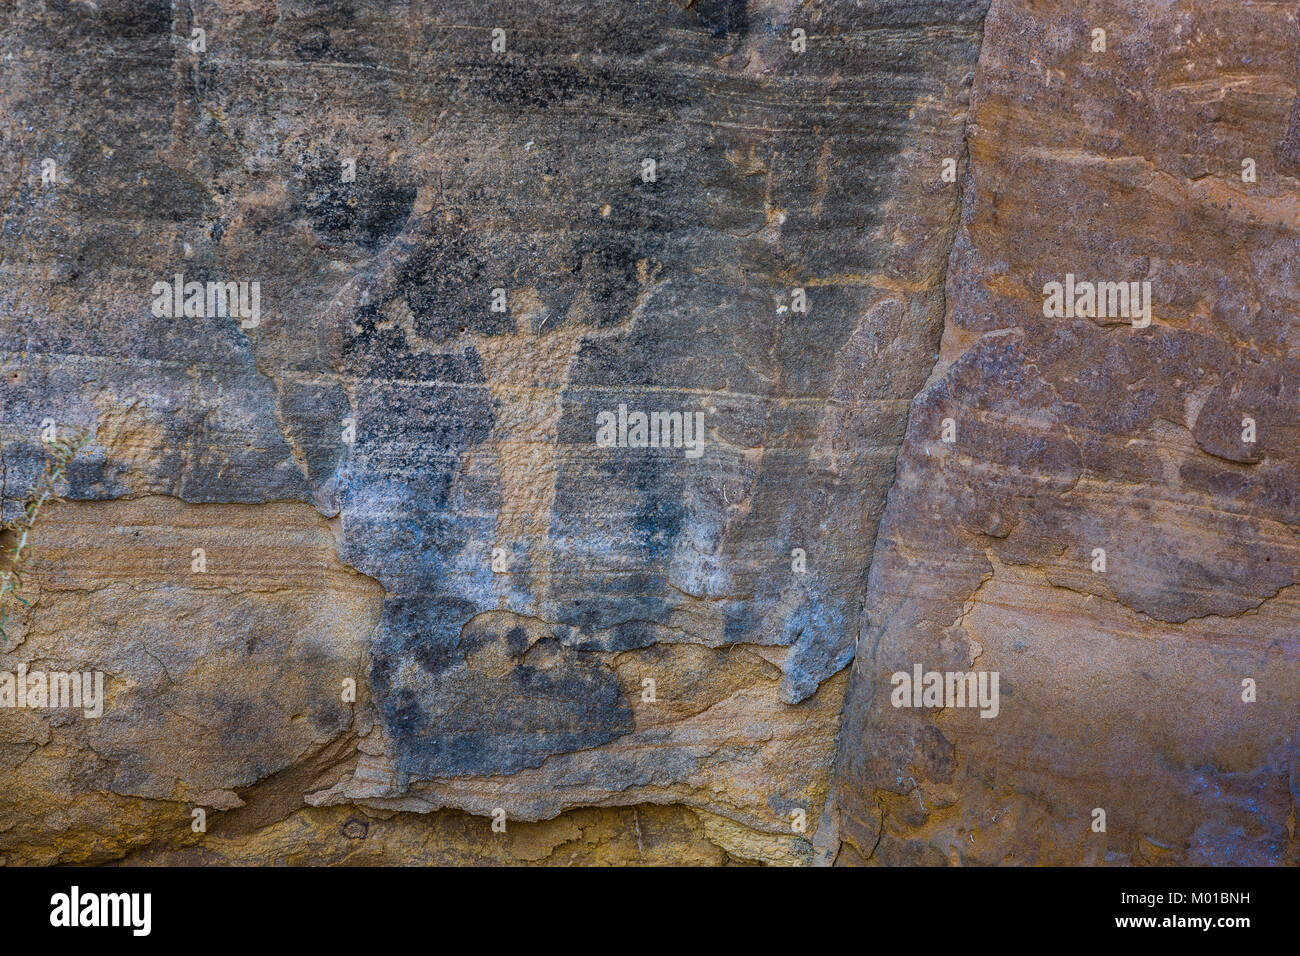 Pictograph of a human figure with arms raised, perhaps a shaman, created by a member of the Fremont Culture, Nine Mile Canyon, Utah, USA Stock Photo